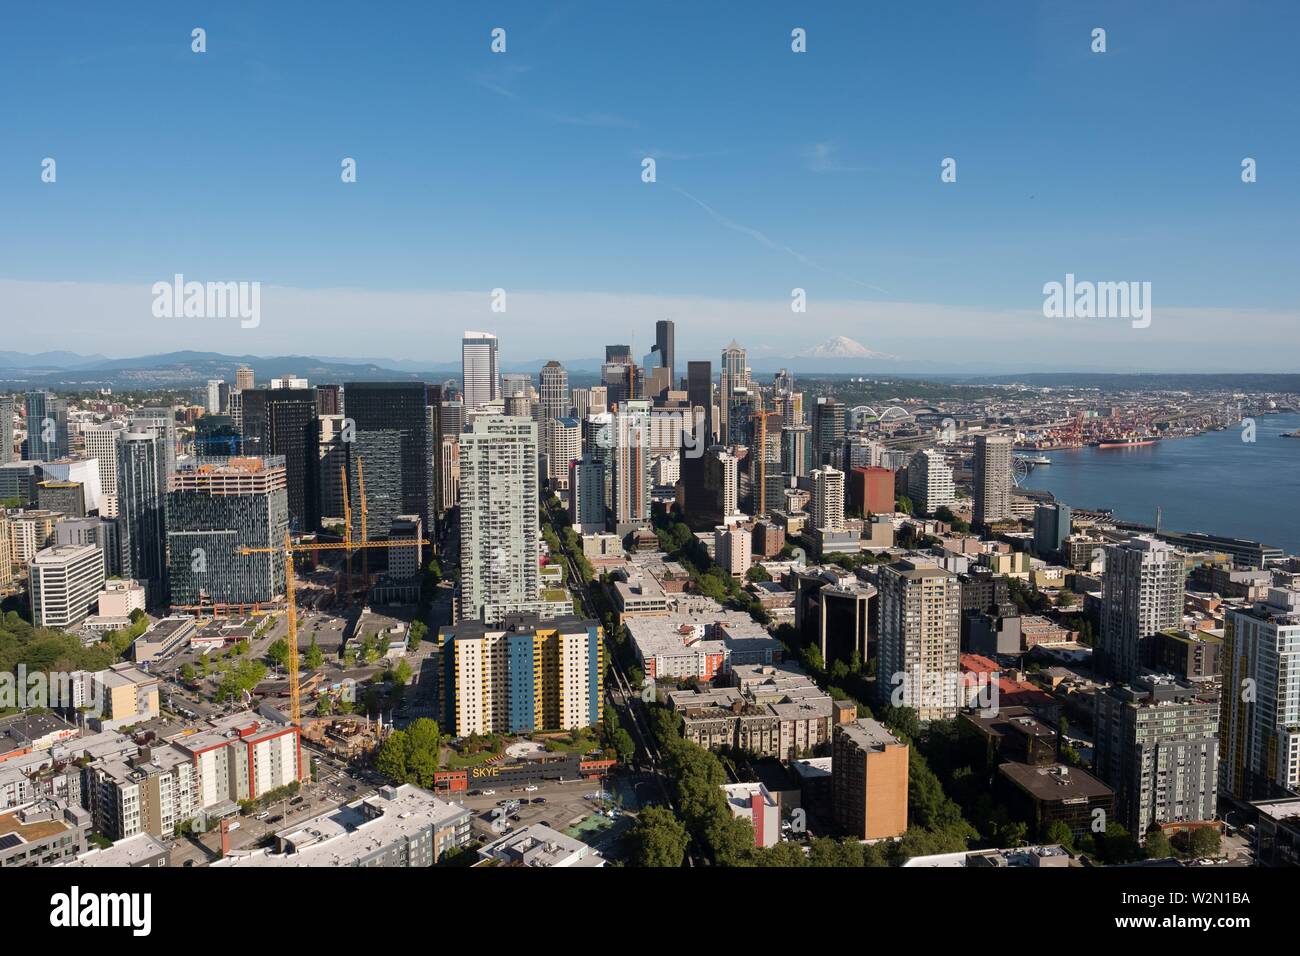 Seattle, WA - June 4, 2019: View of downtown Seattle Washington as seen from the top of the Space Needle. Stock Photo